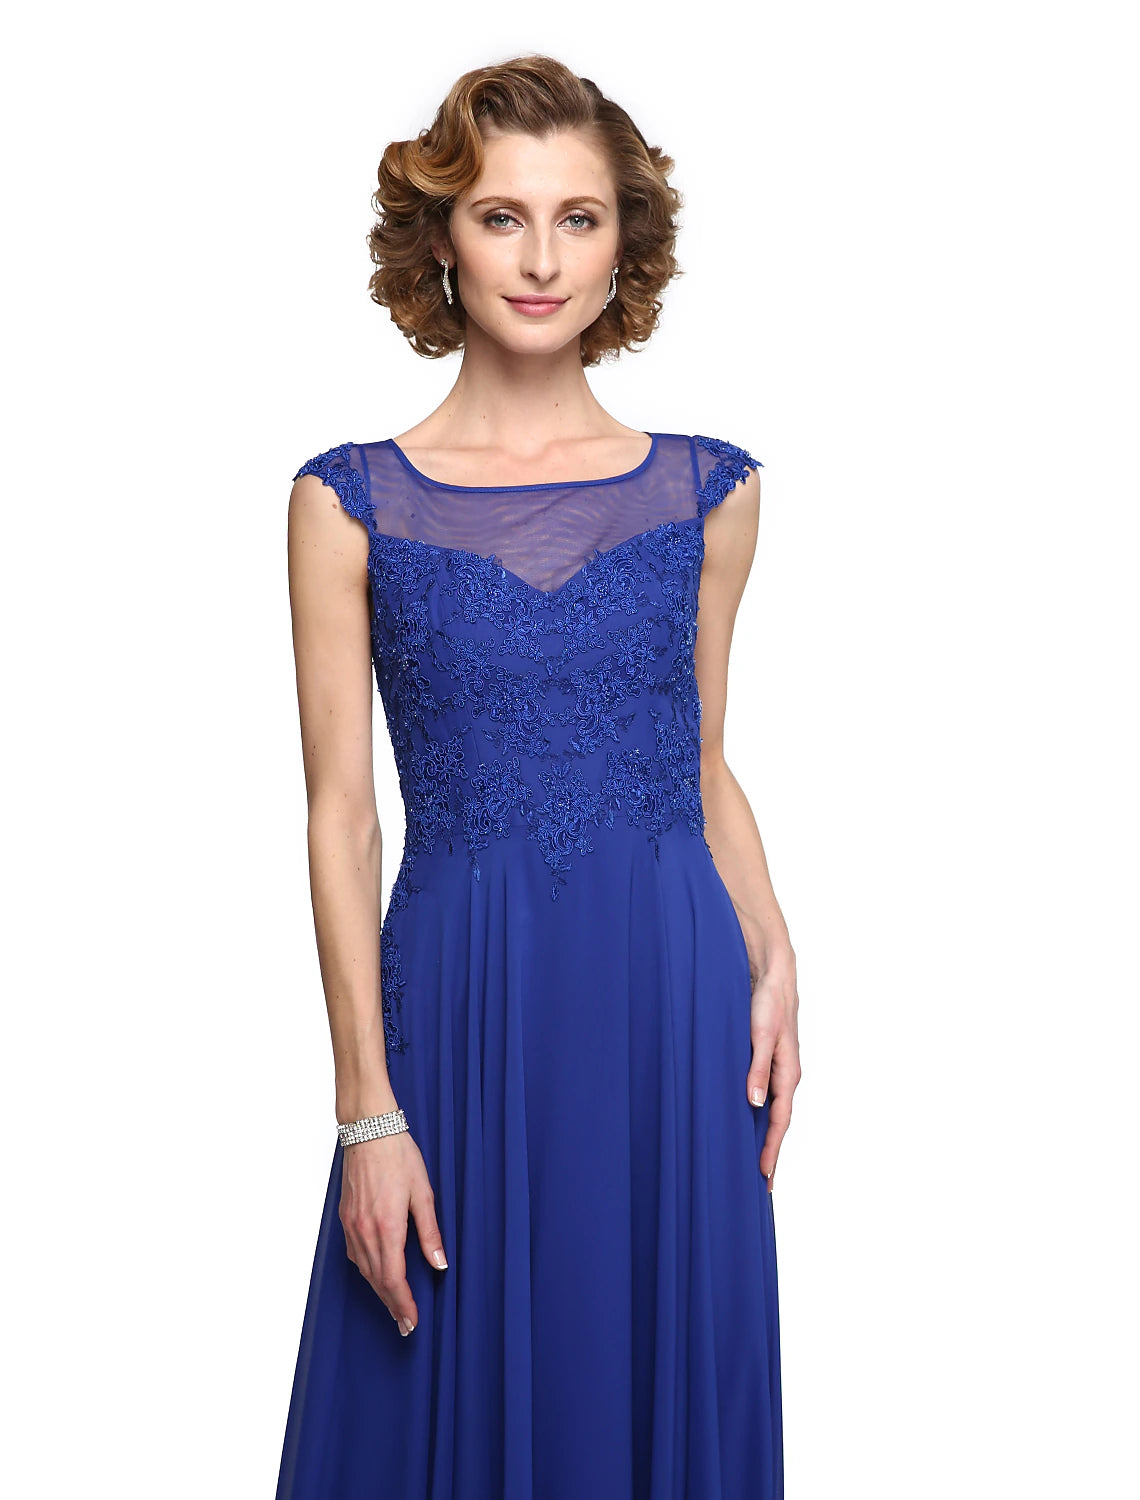 A-Line Mother of the Bride Dress Elegant Jewel Neck Ankle Length Chiffon Lace Sleeveless with Appliques